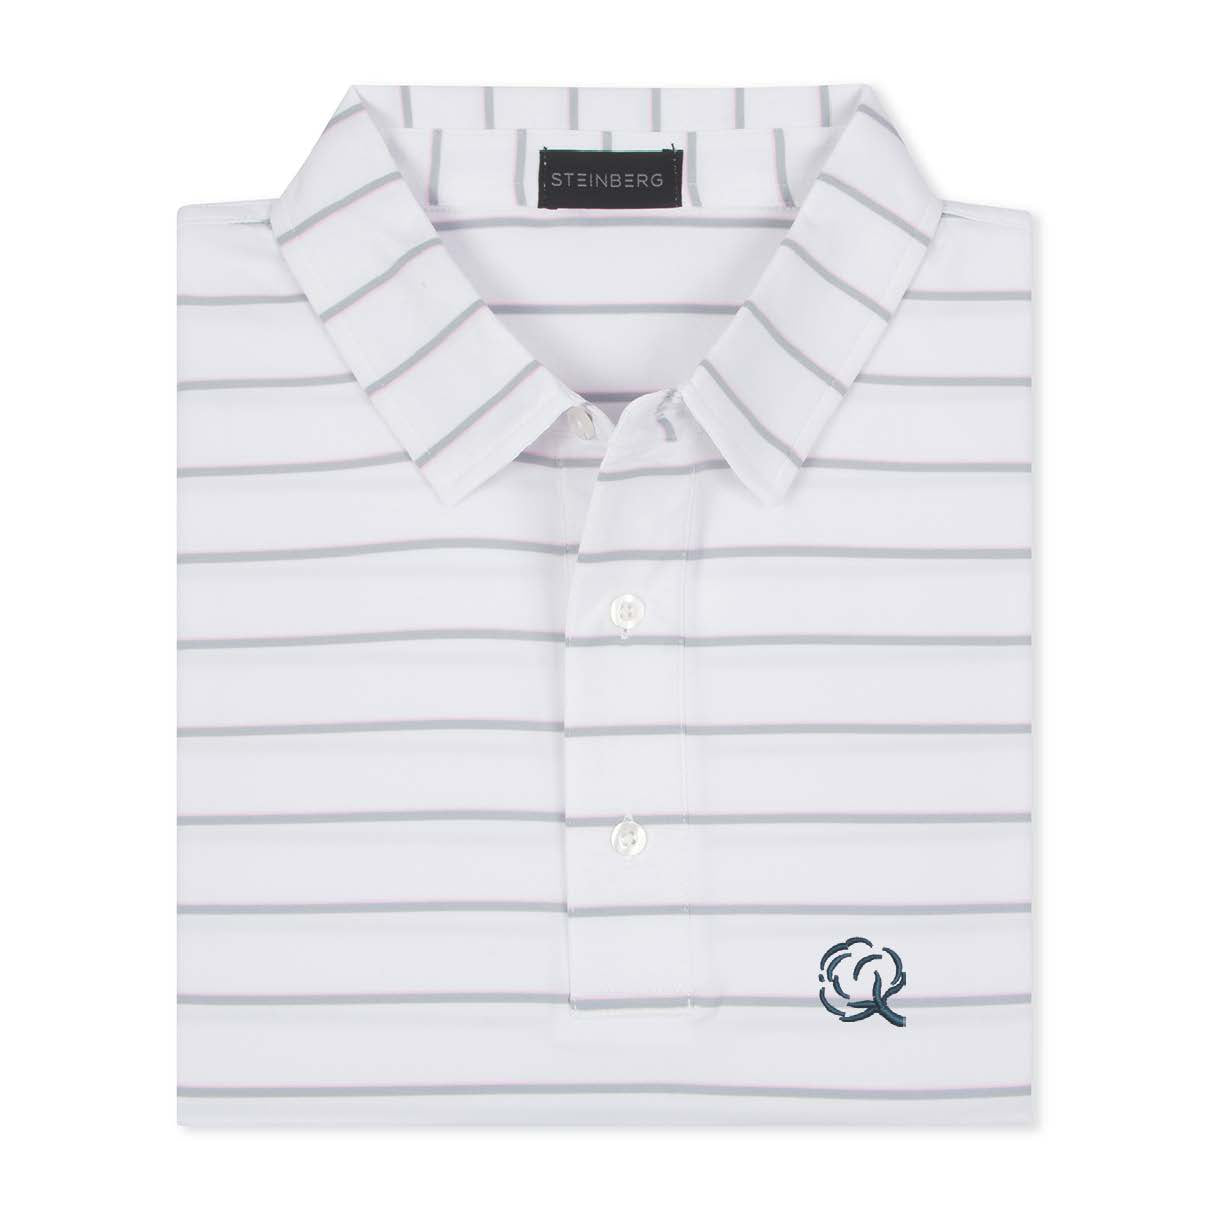 The Bite Performance Polo Cotton Collection